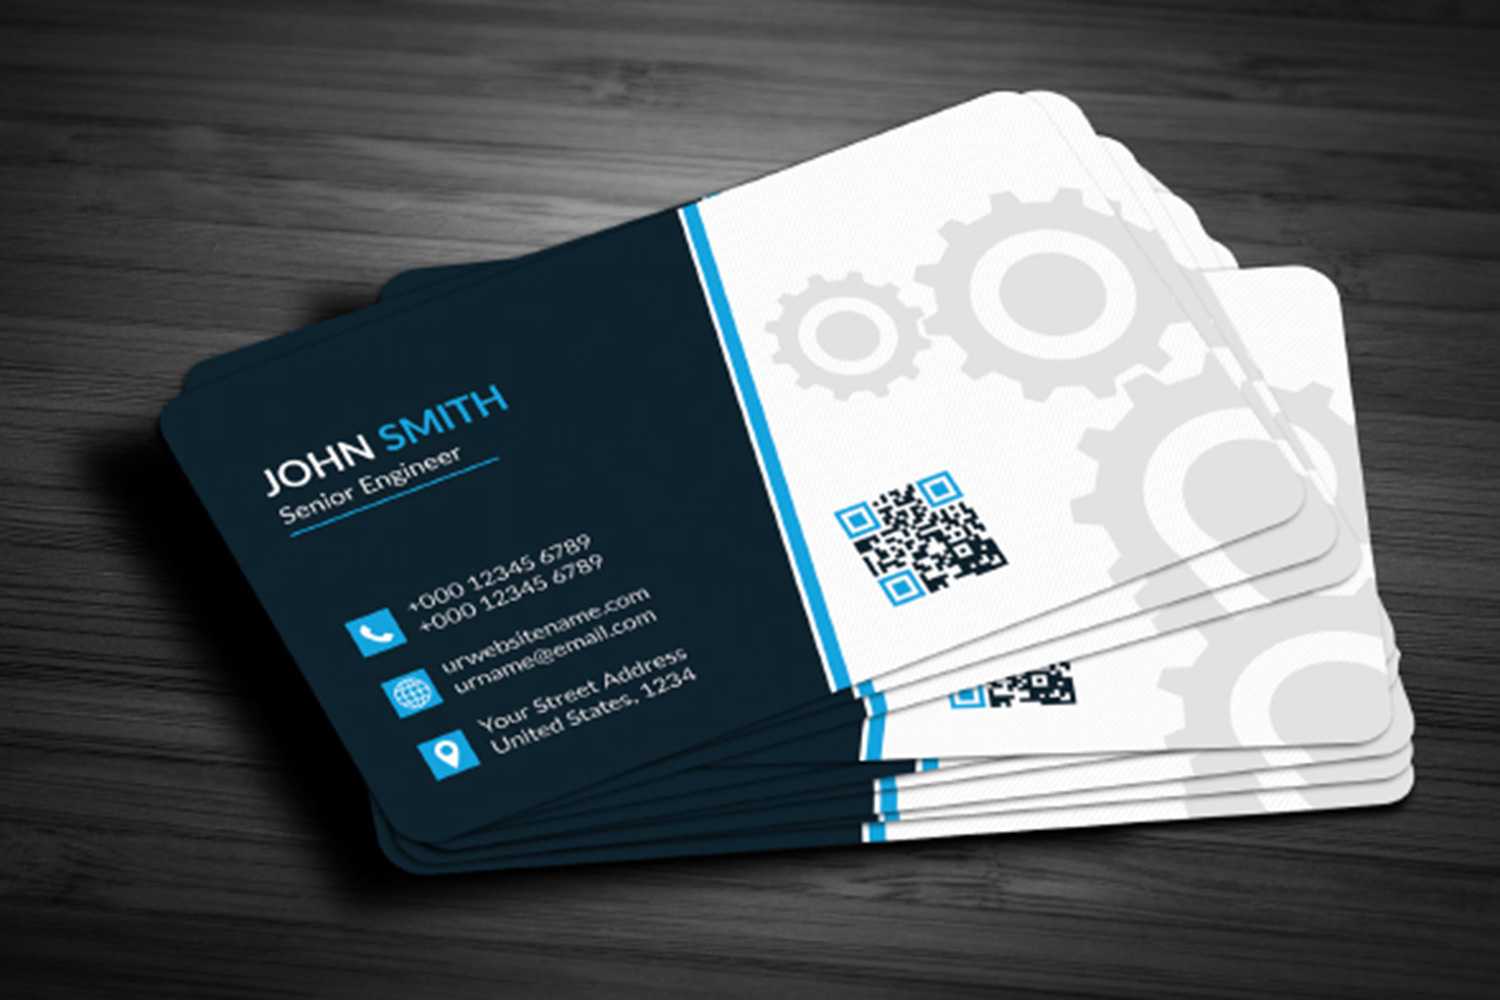 001 Free Download Business Card Templates Template Top Ideas Throughout Free Business Card Templates In Psd Format